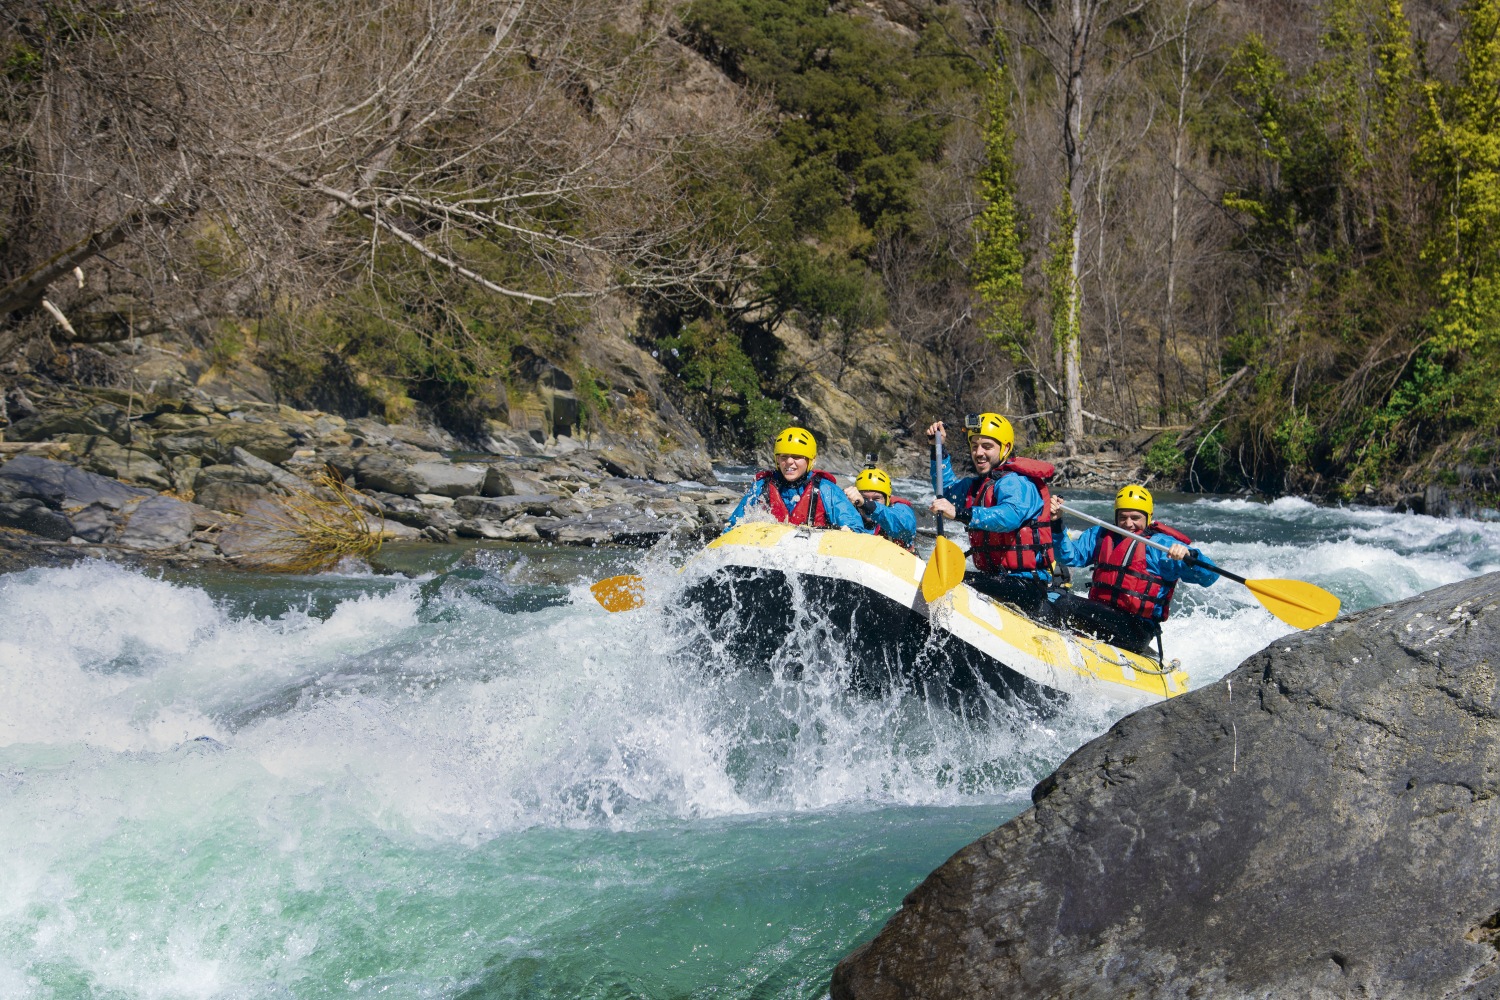 Group of people going over rapids whilst white water rafting